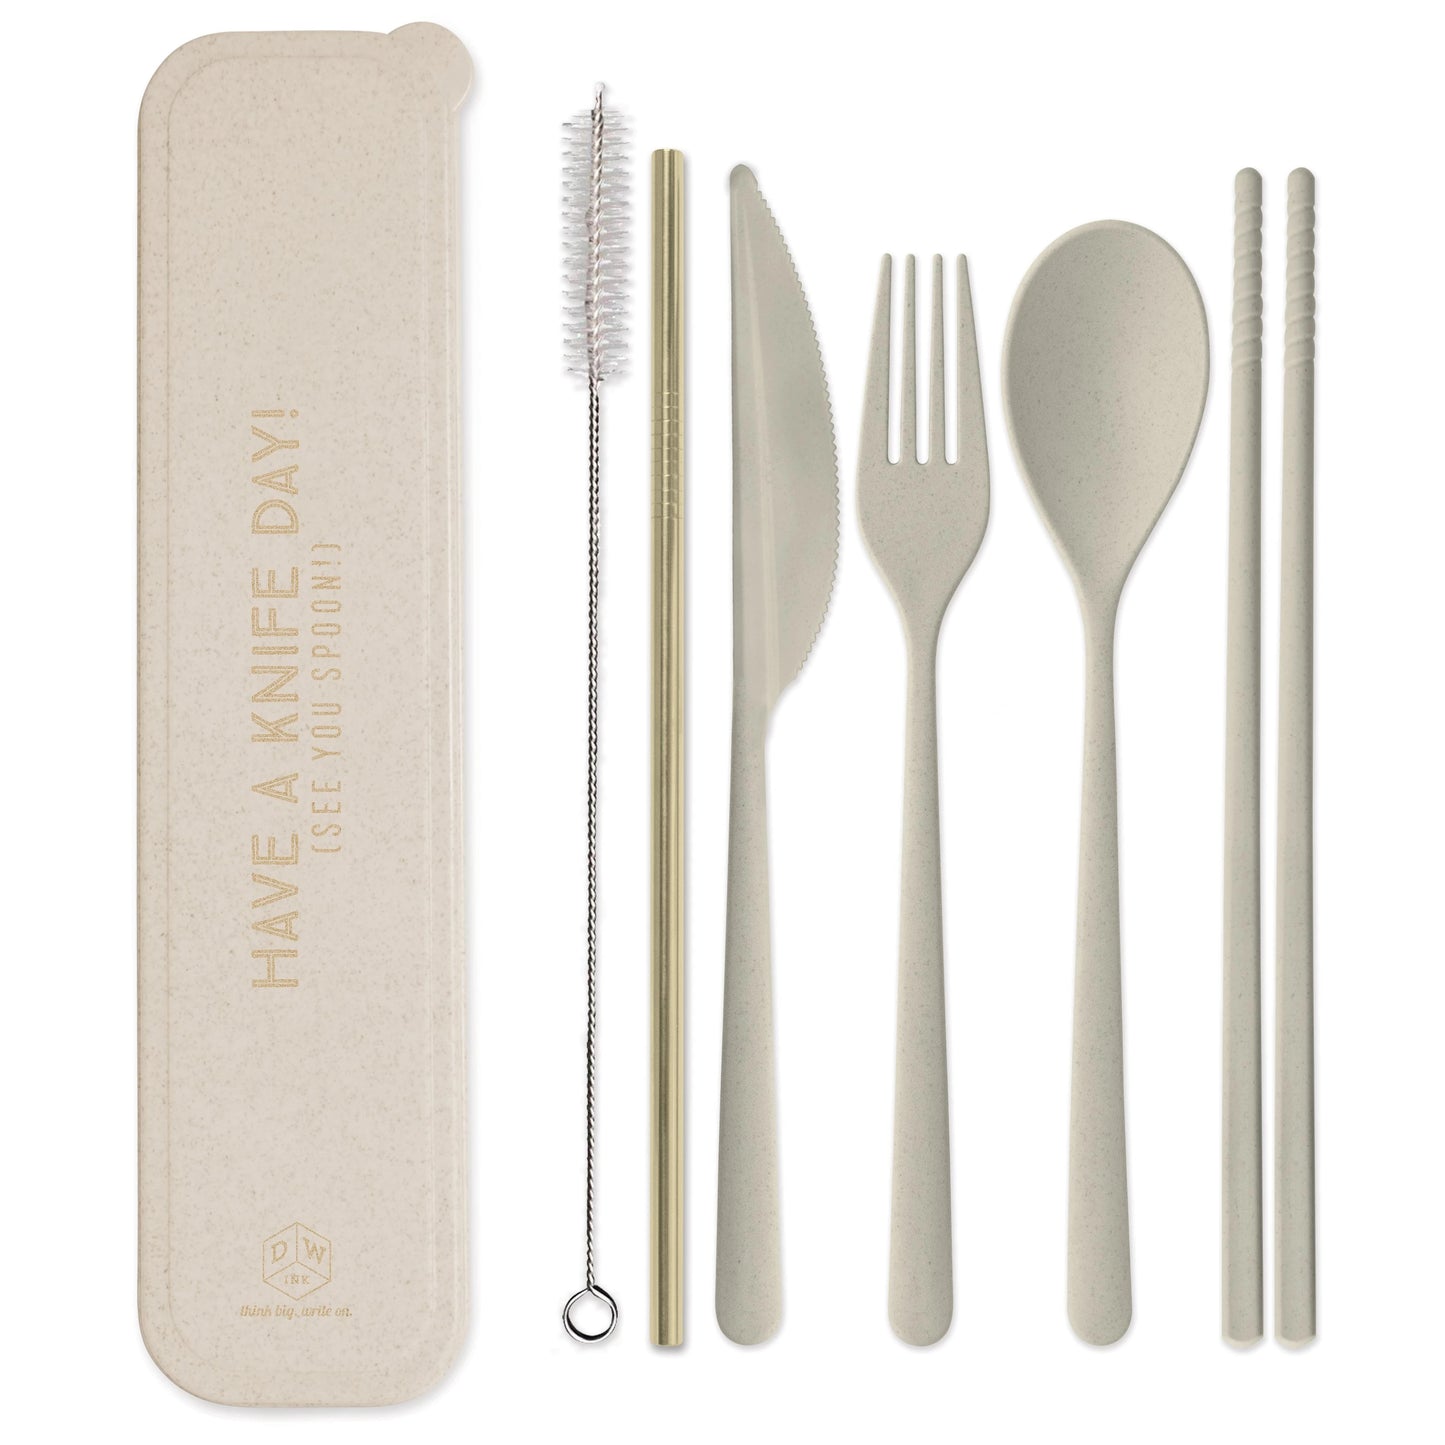 Have a Knife Day - Resusable cutlery set